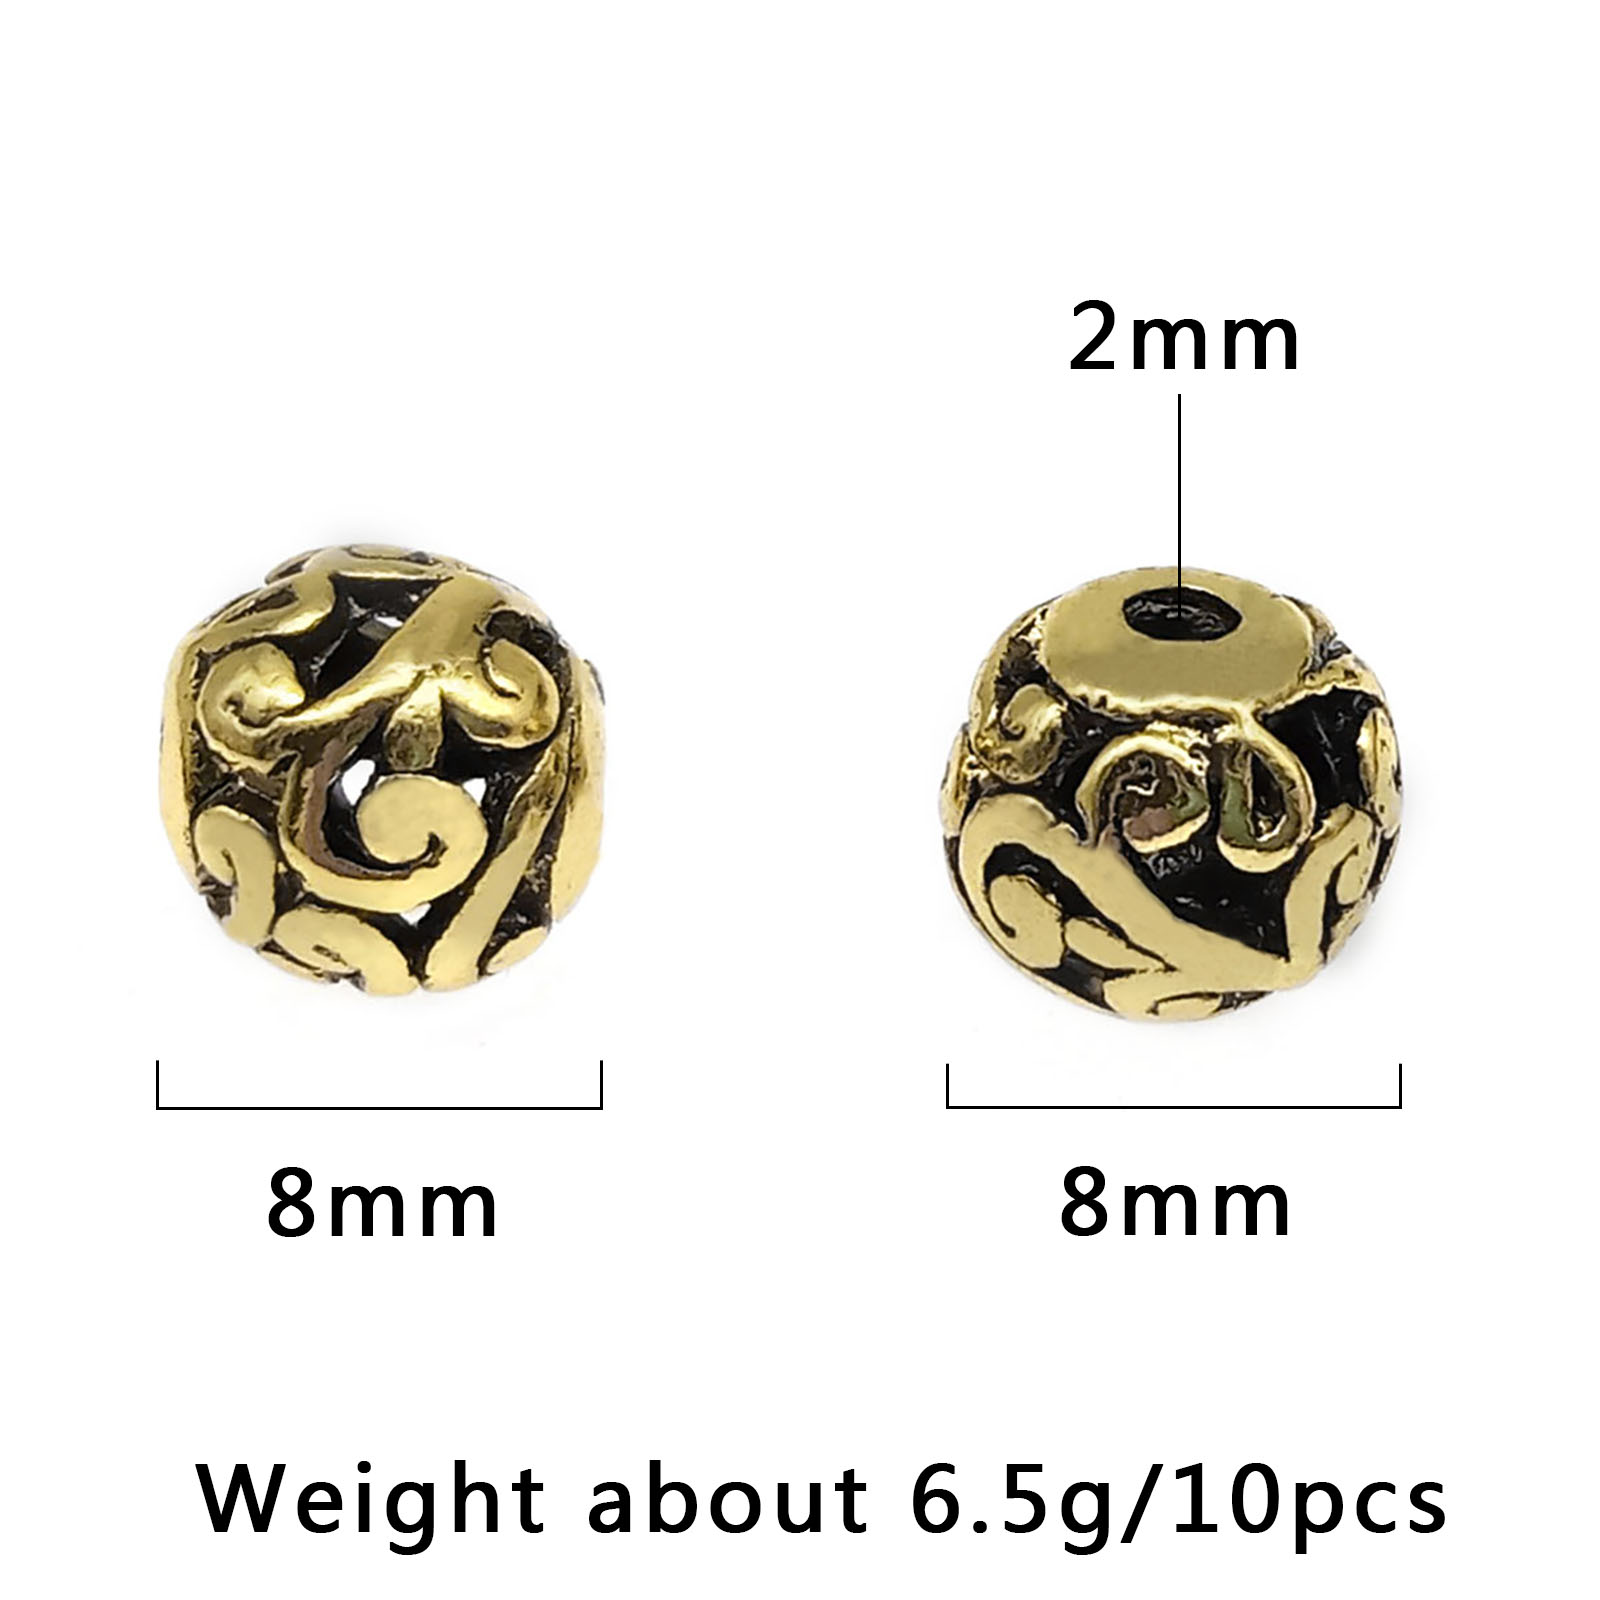 The diameter of the beads is 8mm and the hole diameter is about 2mm